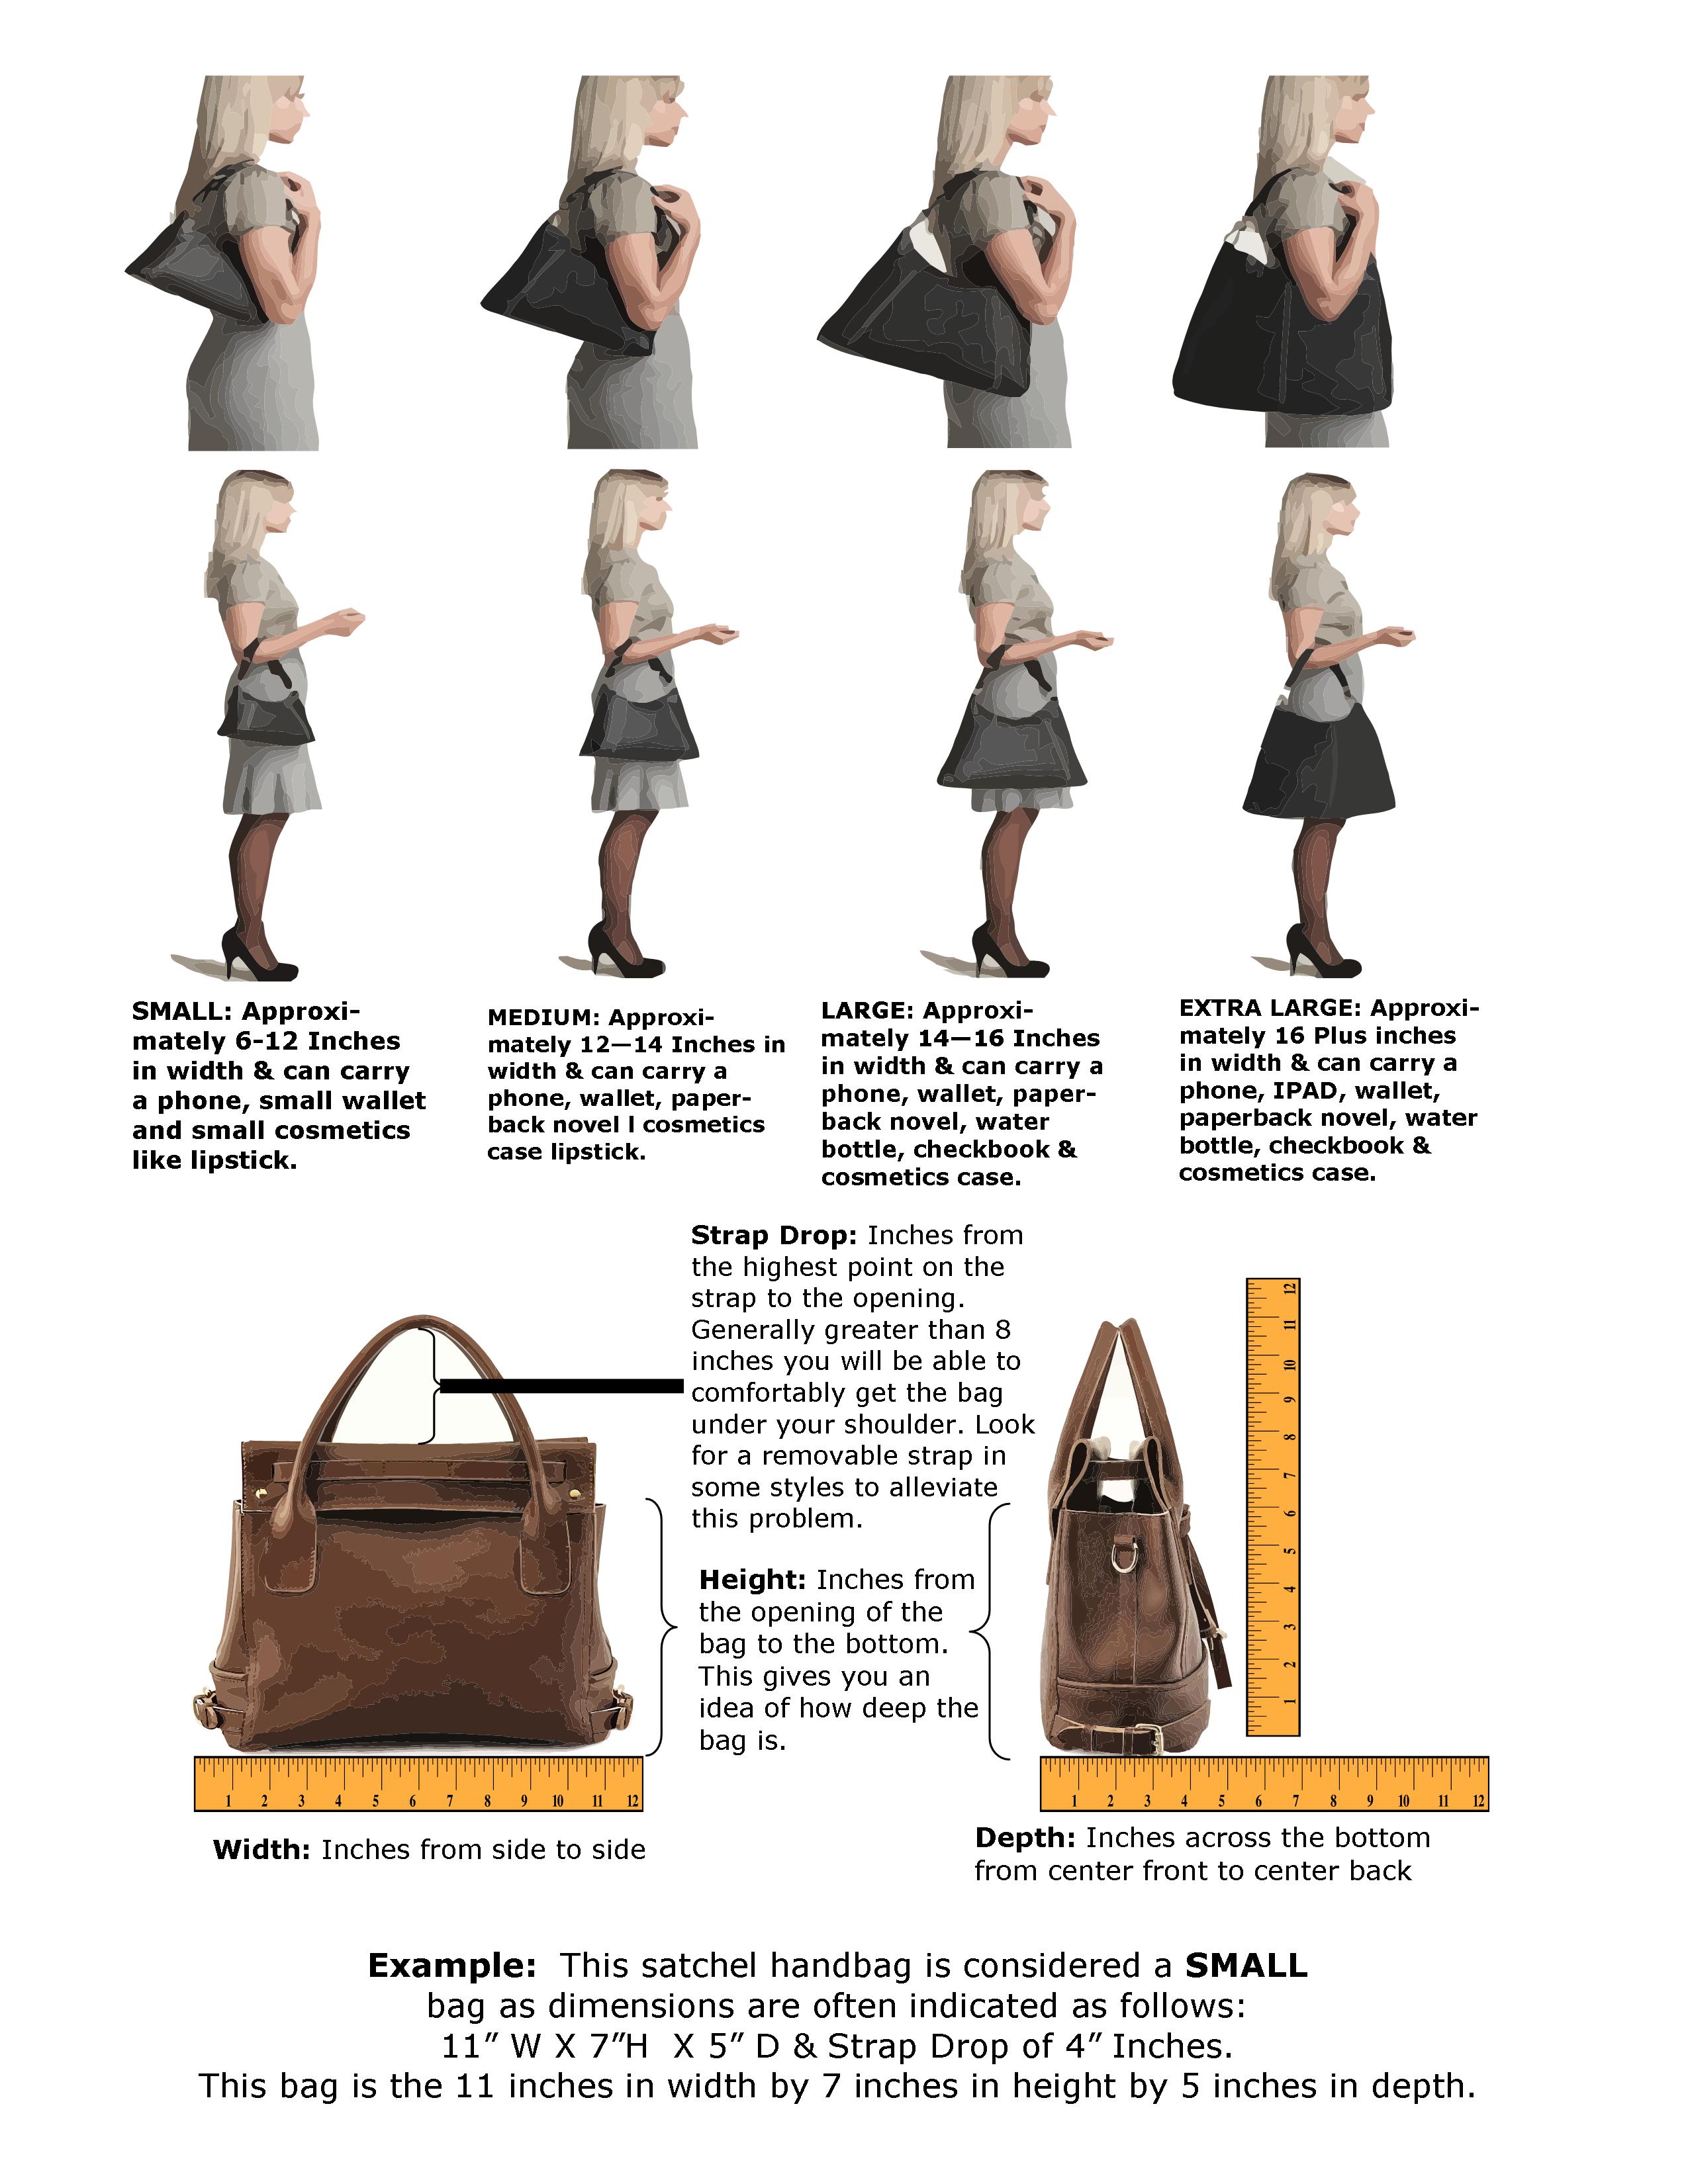 Anatomy of a Handbag - Part 2 - Glamour for the everyday woman